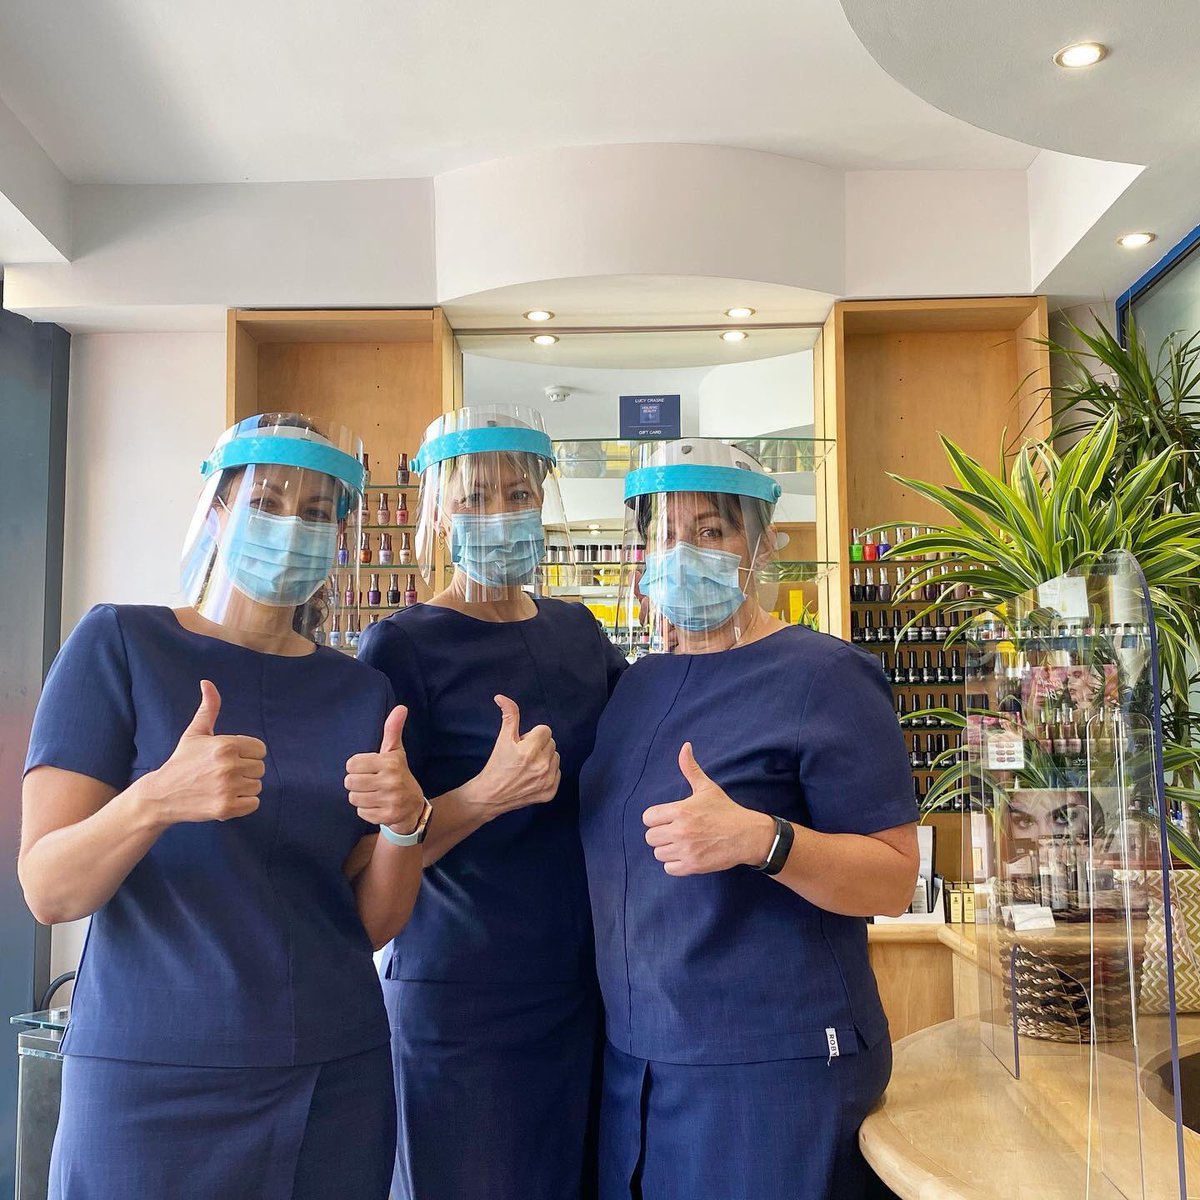 We ARE smiling to be back! Don’t forget, from August 1st we are able to carry out treatments on the face/head area 😷💆🏼‍♀️💆🏽
#returntowork #facials #lashesandbrows #facialwaxing #scalpmassage #beauty #beautysalon #openforbusiness  #chapelallerton